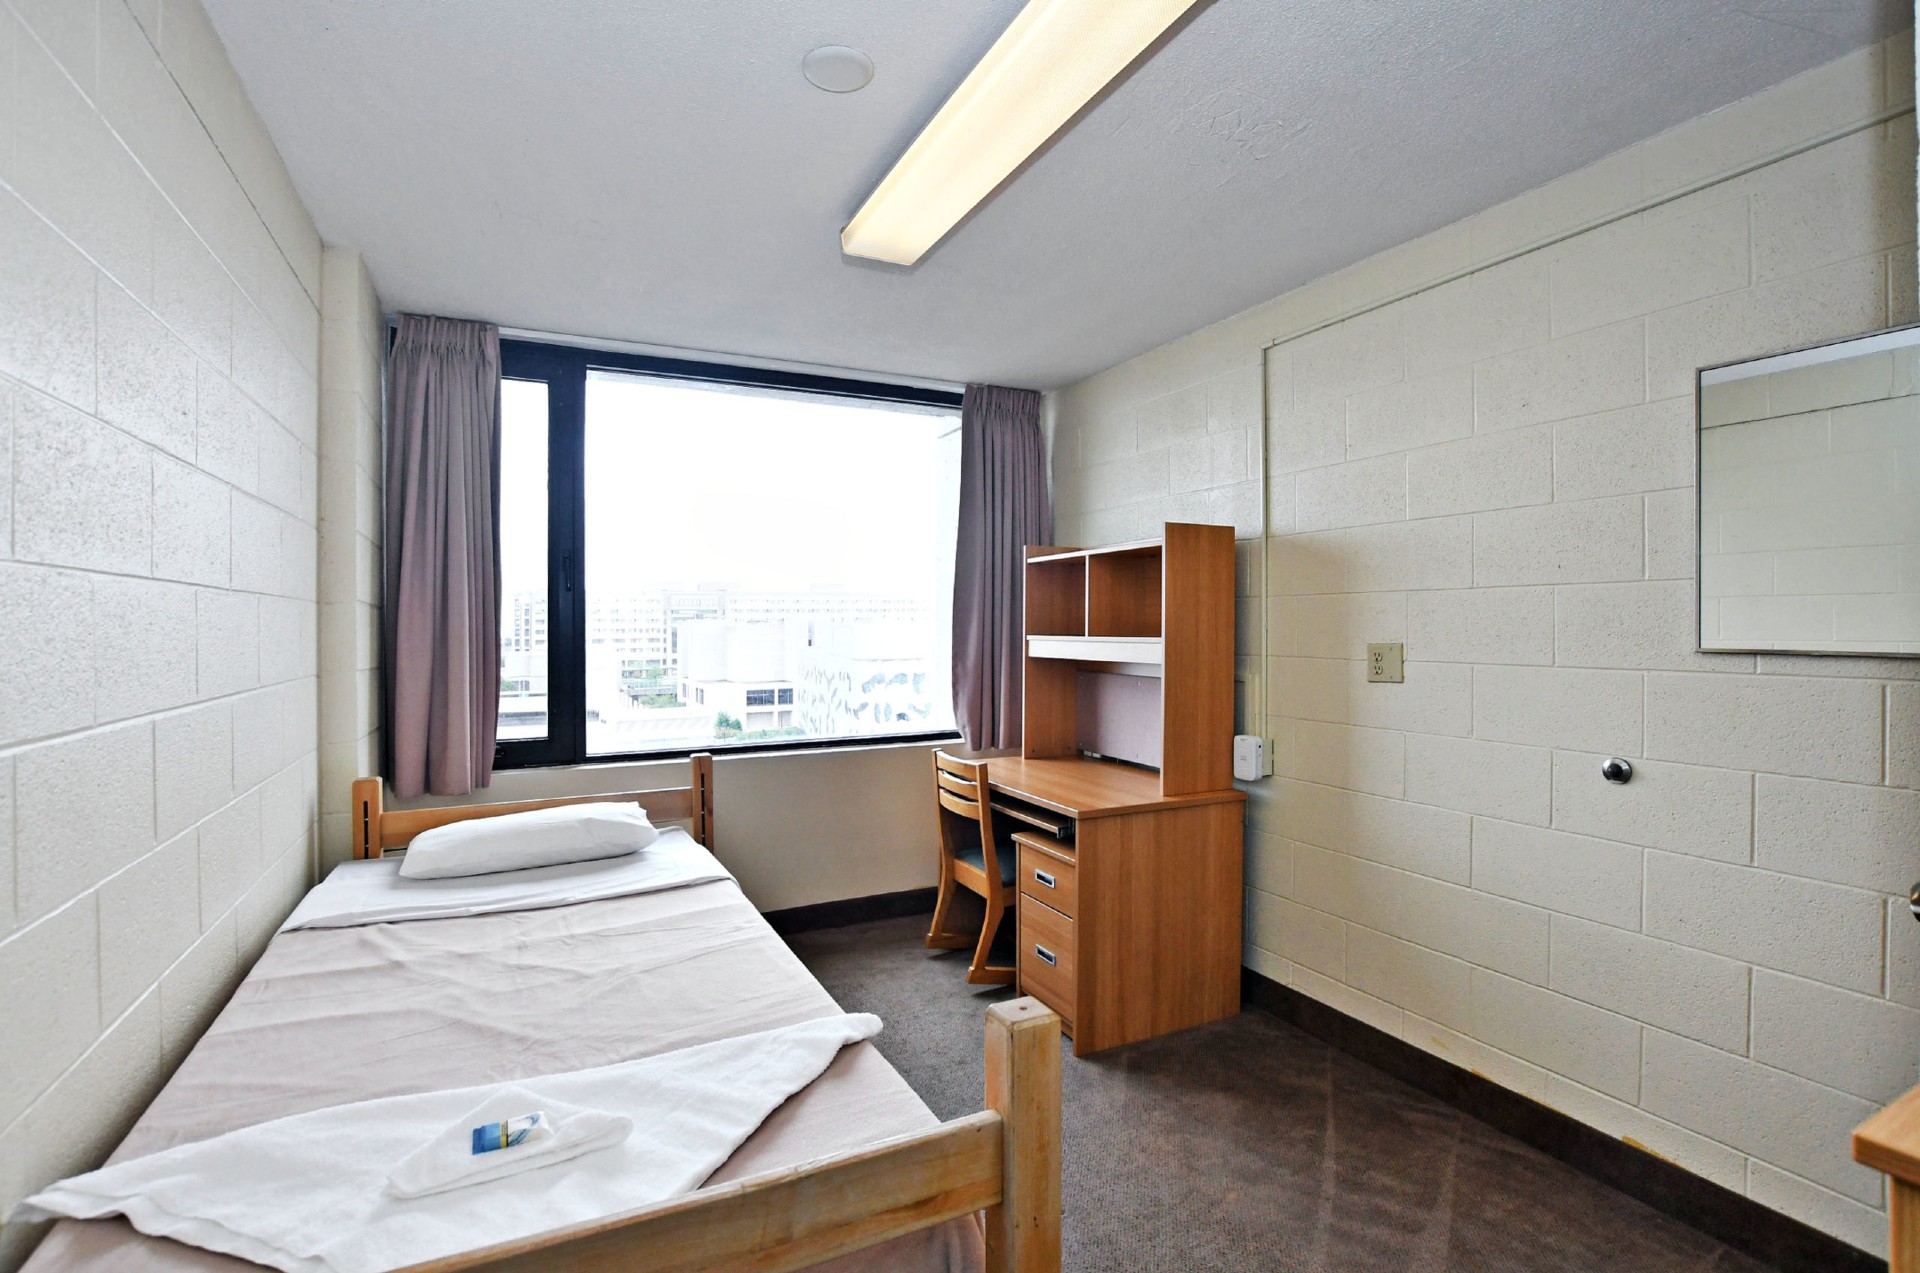 Picture of the single room in Stong building, a bed and a desk with a window in the middle of the room